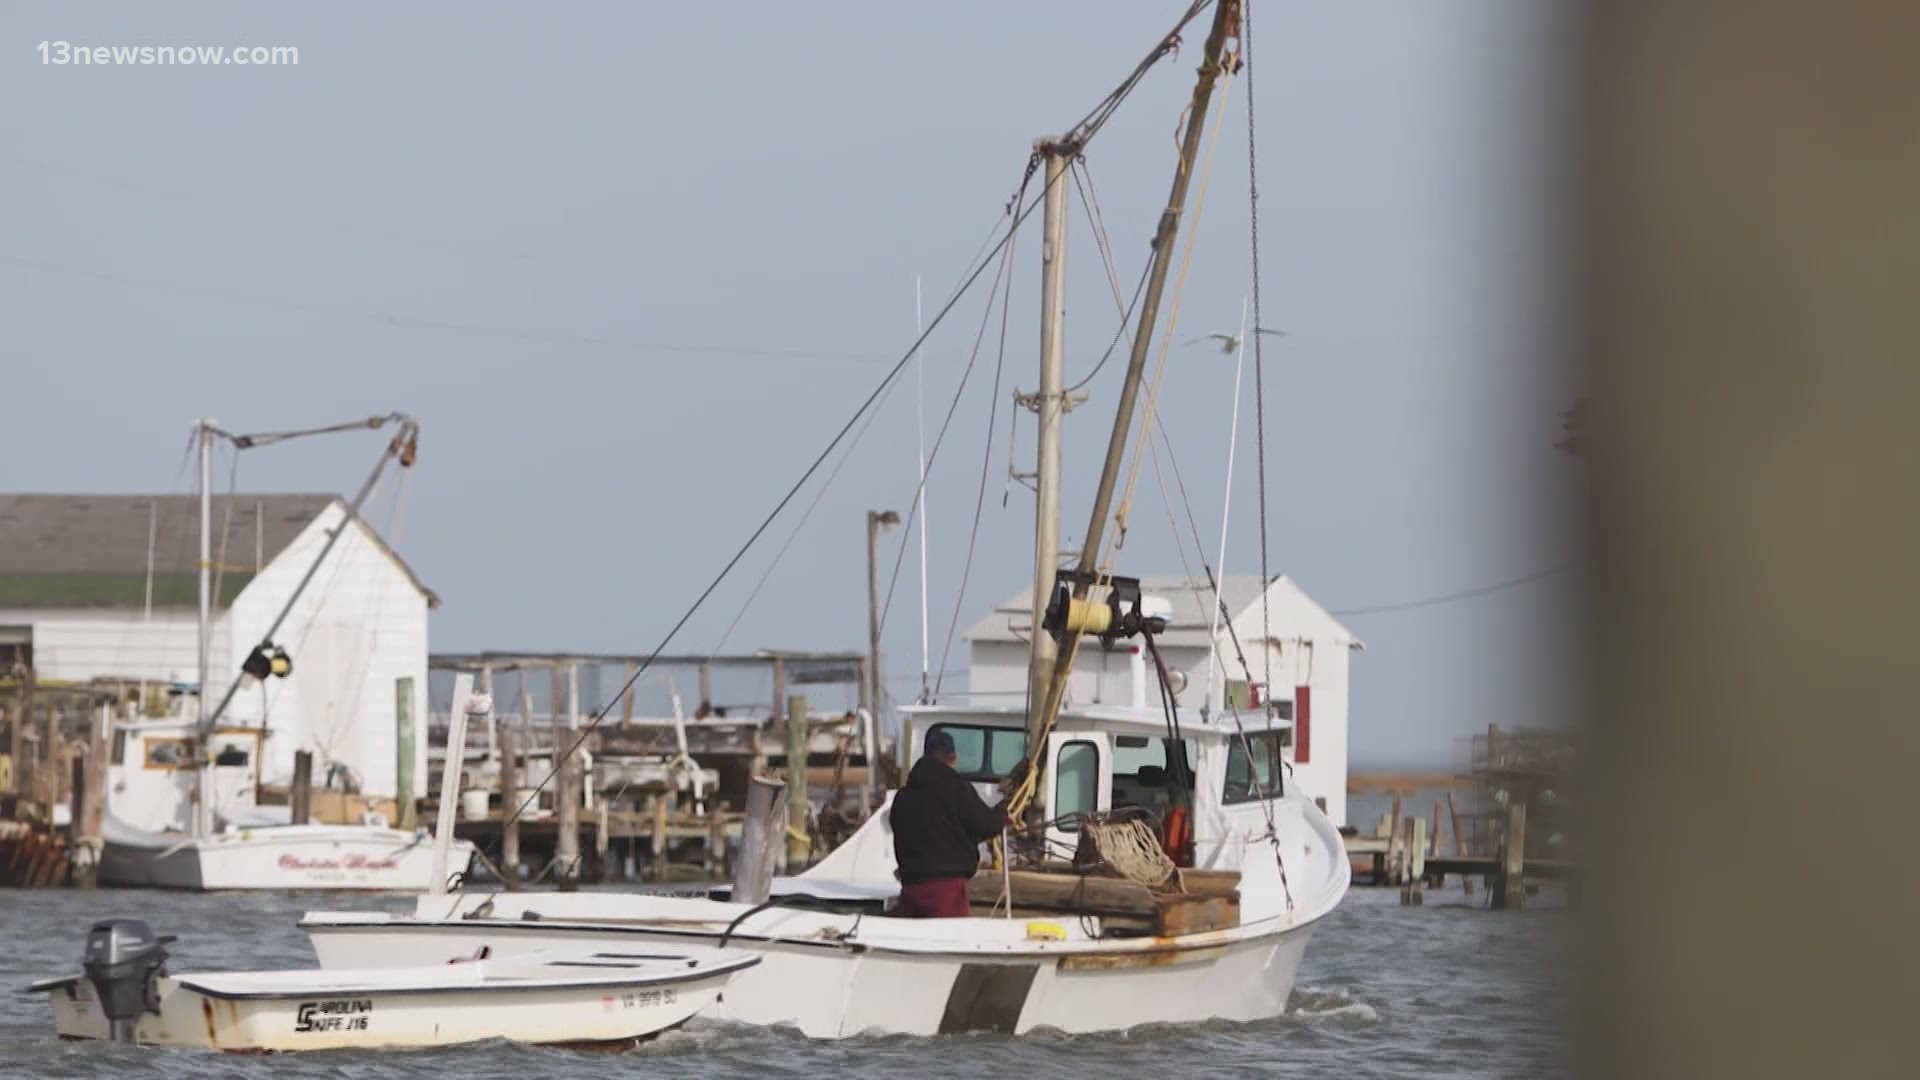 Tangier Island is home to a small fishing community in the Chesapeake Bay. Erosion has been eating away at the island since it was settled in the 1700s.